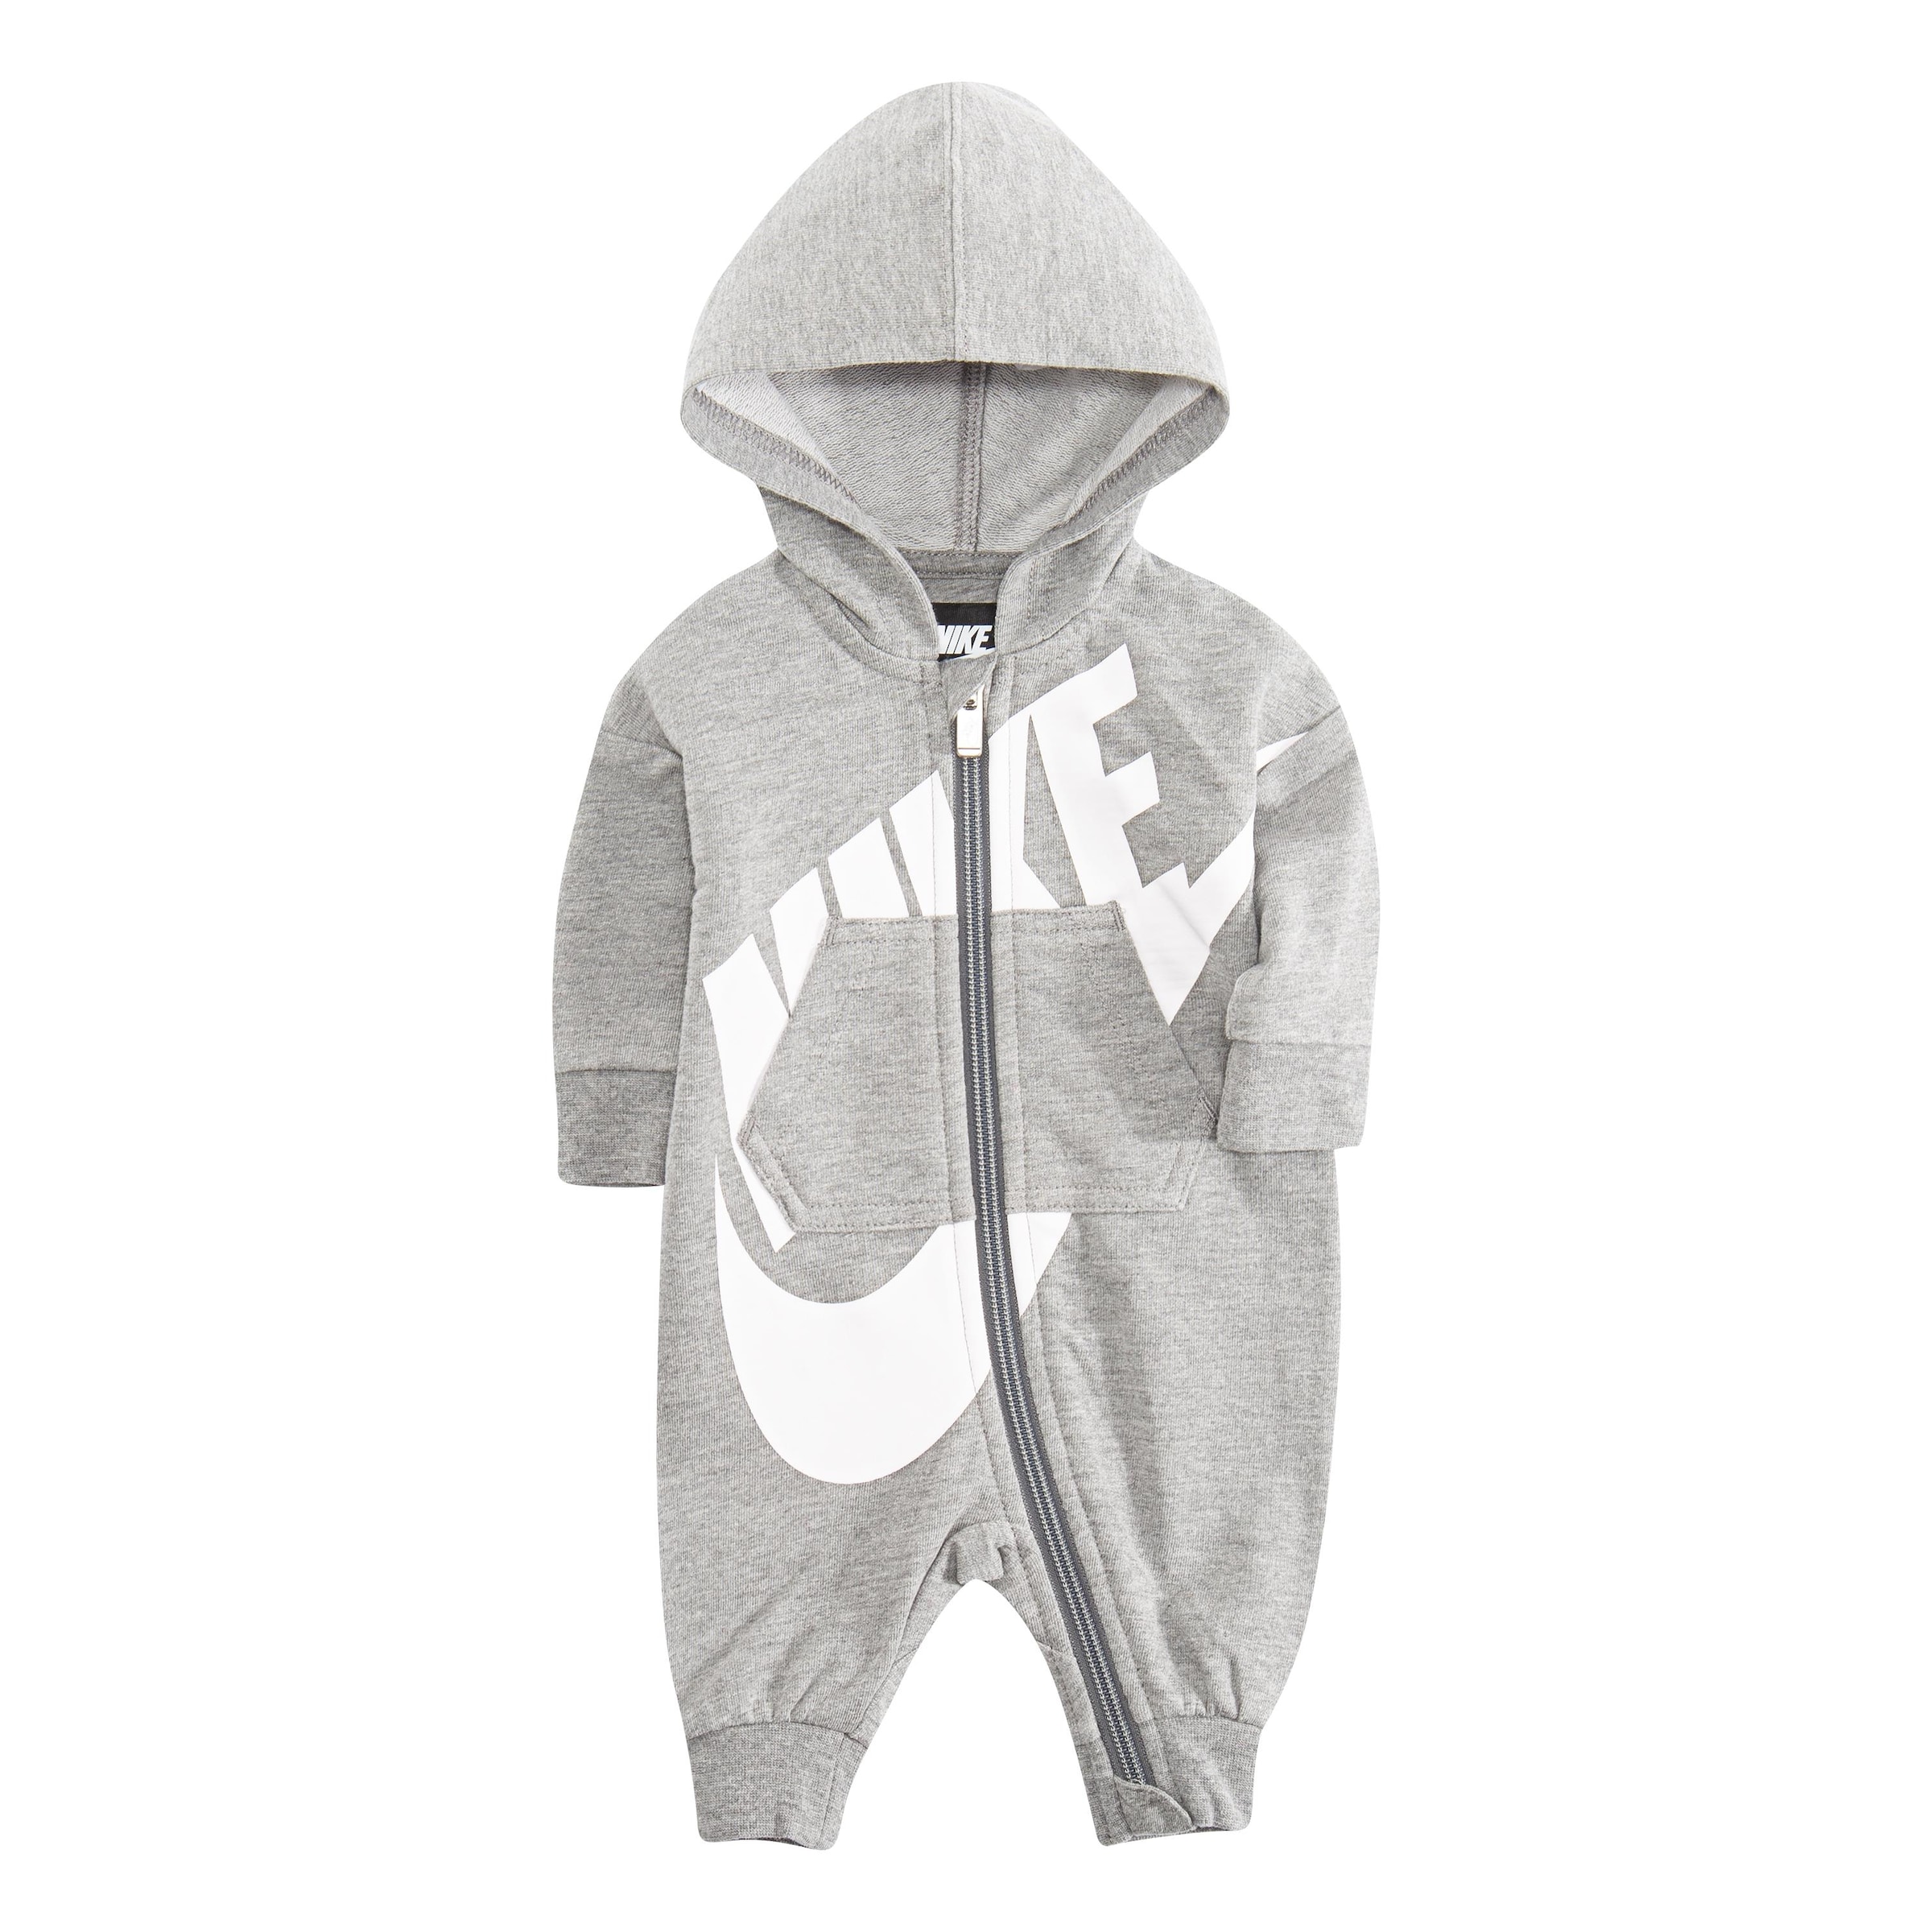 ALL »NKN Nike PLAY COVERALL« online Sportswear Jumpsuit DAY bei OTTO